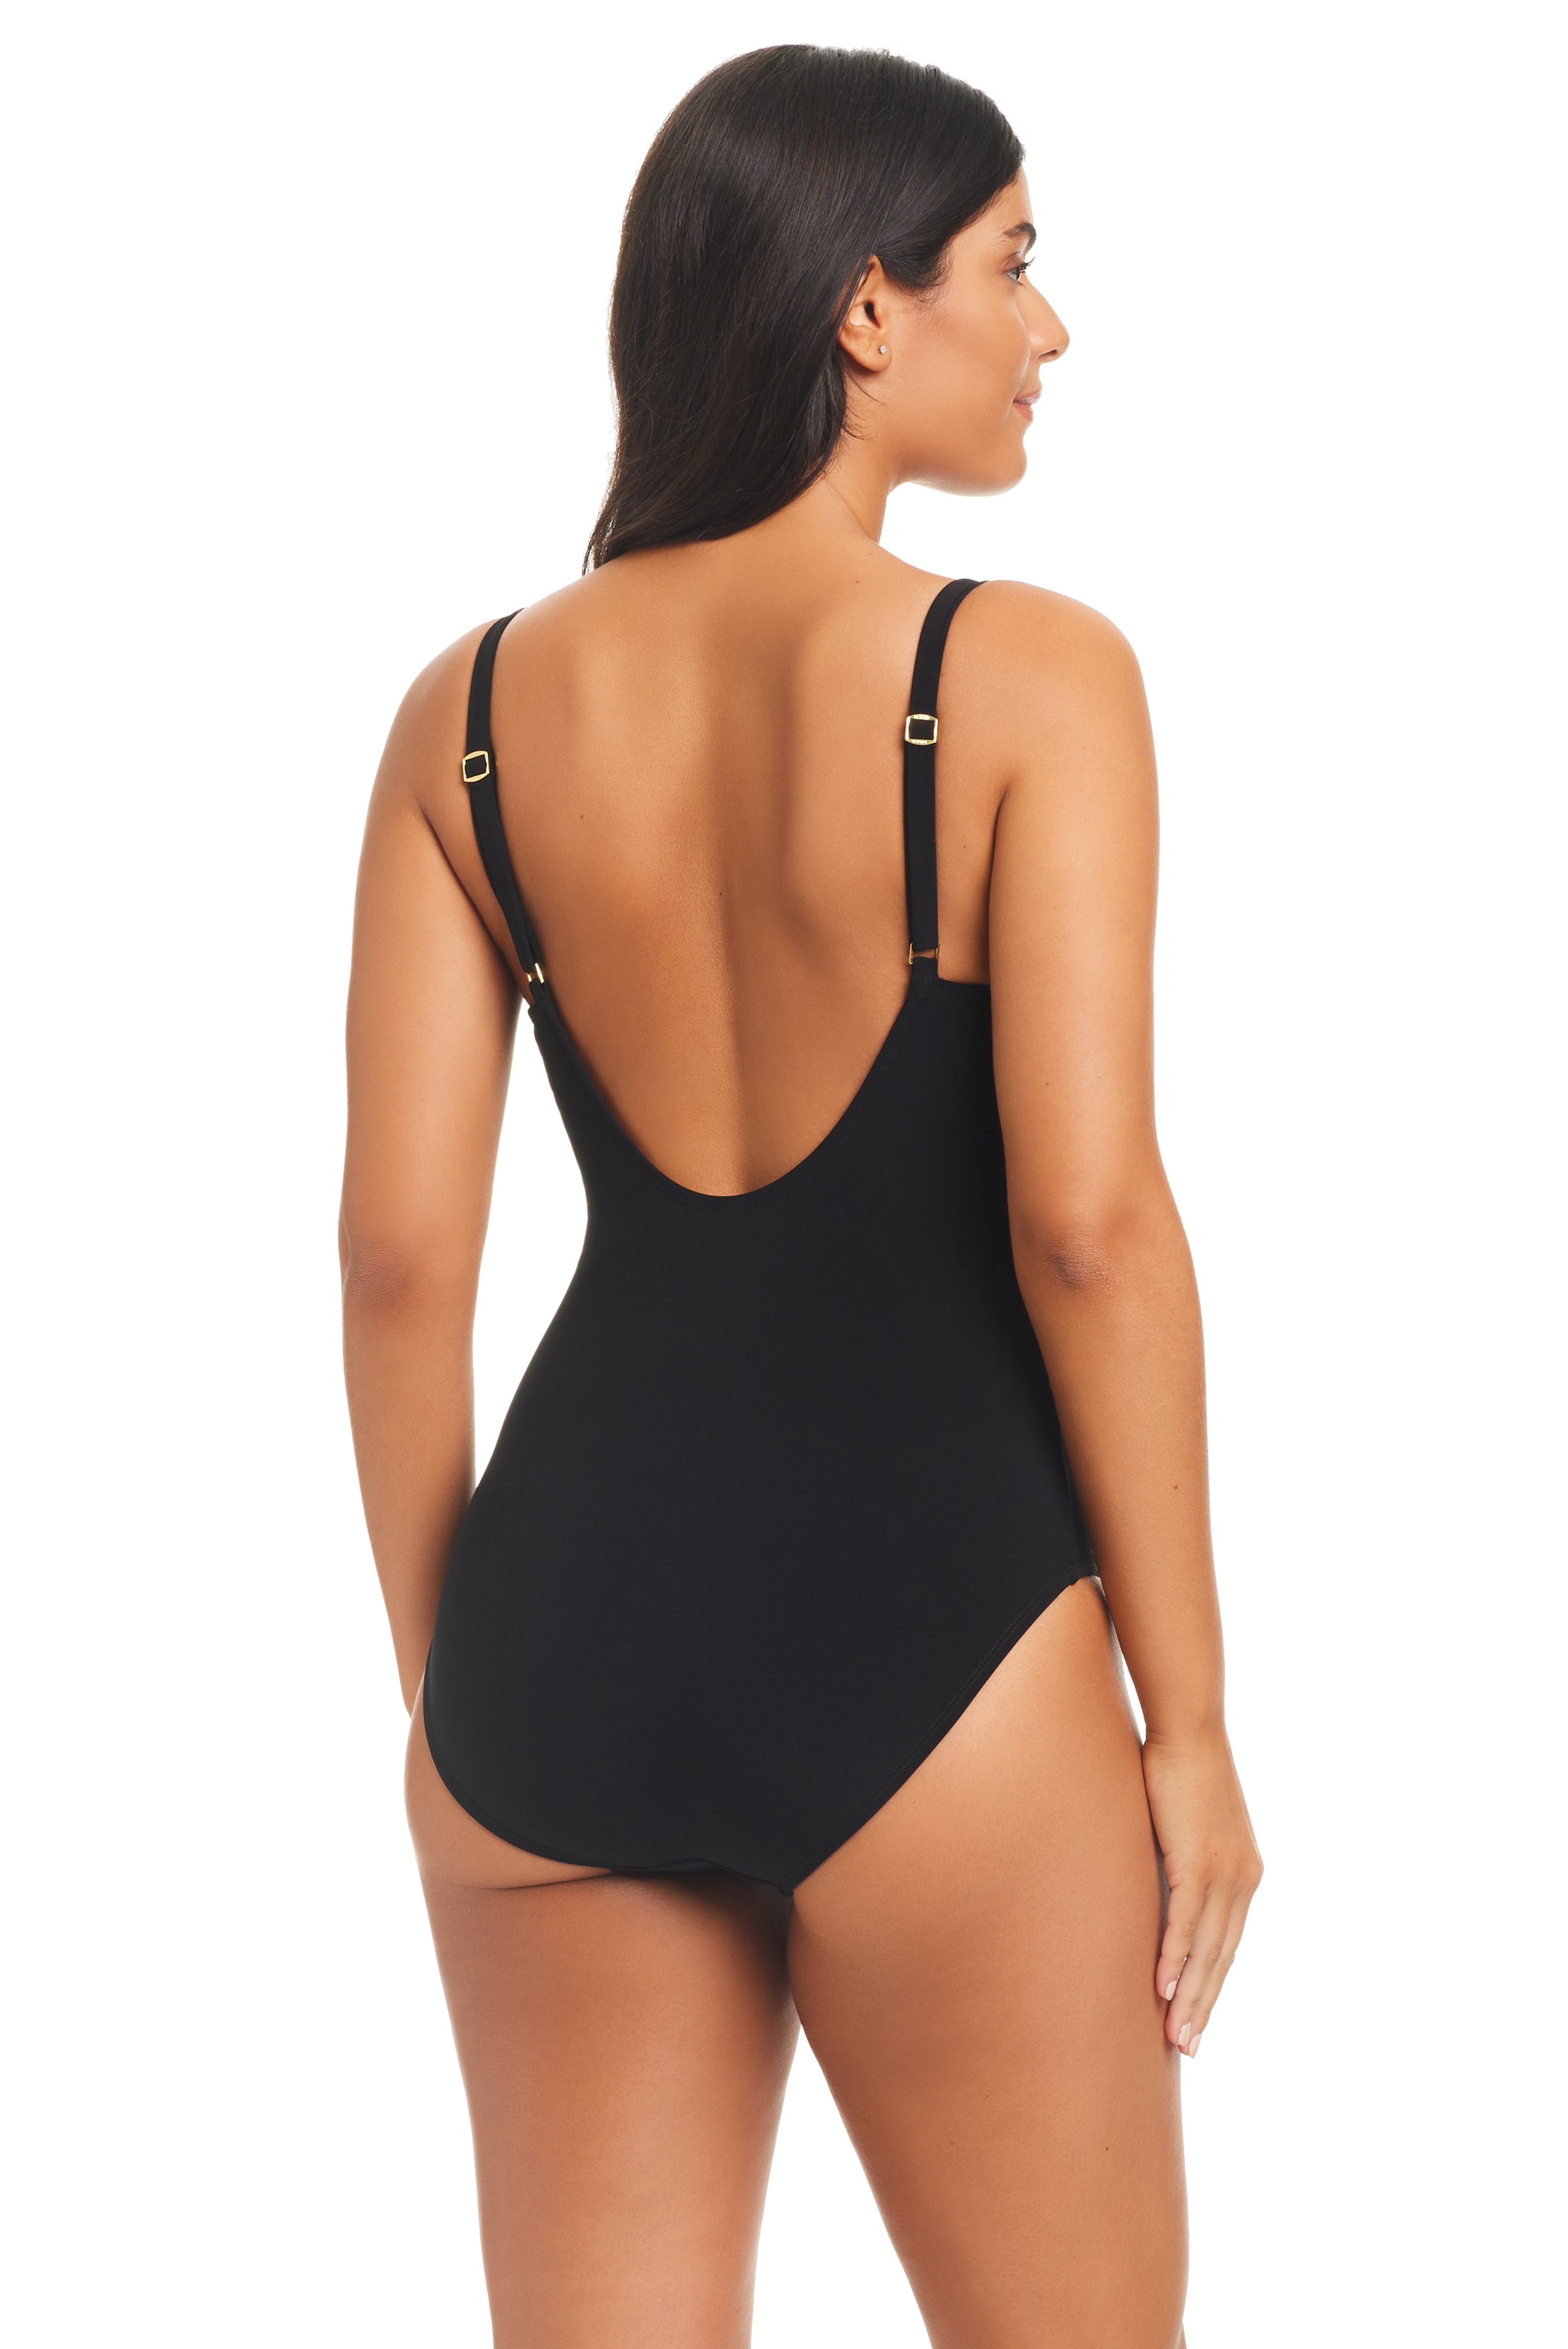 Tummy Control, One Piece Swimsuits